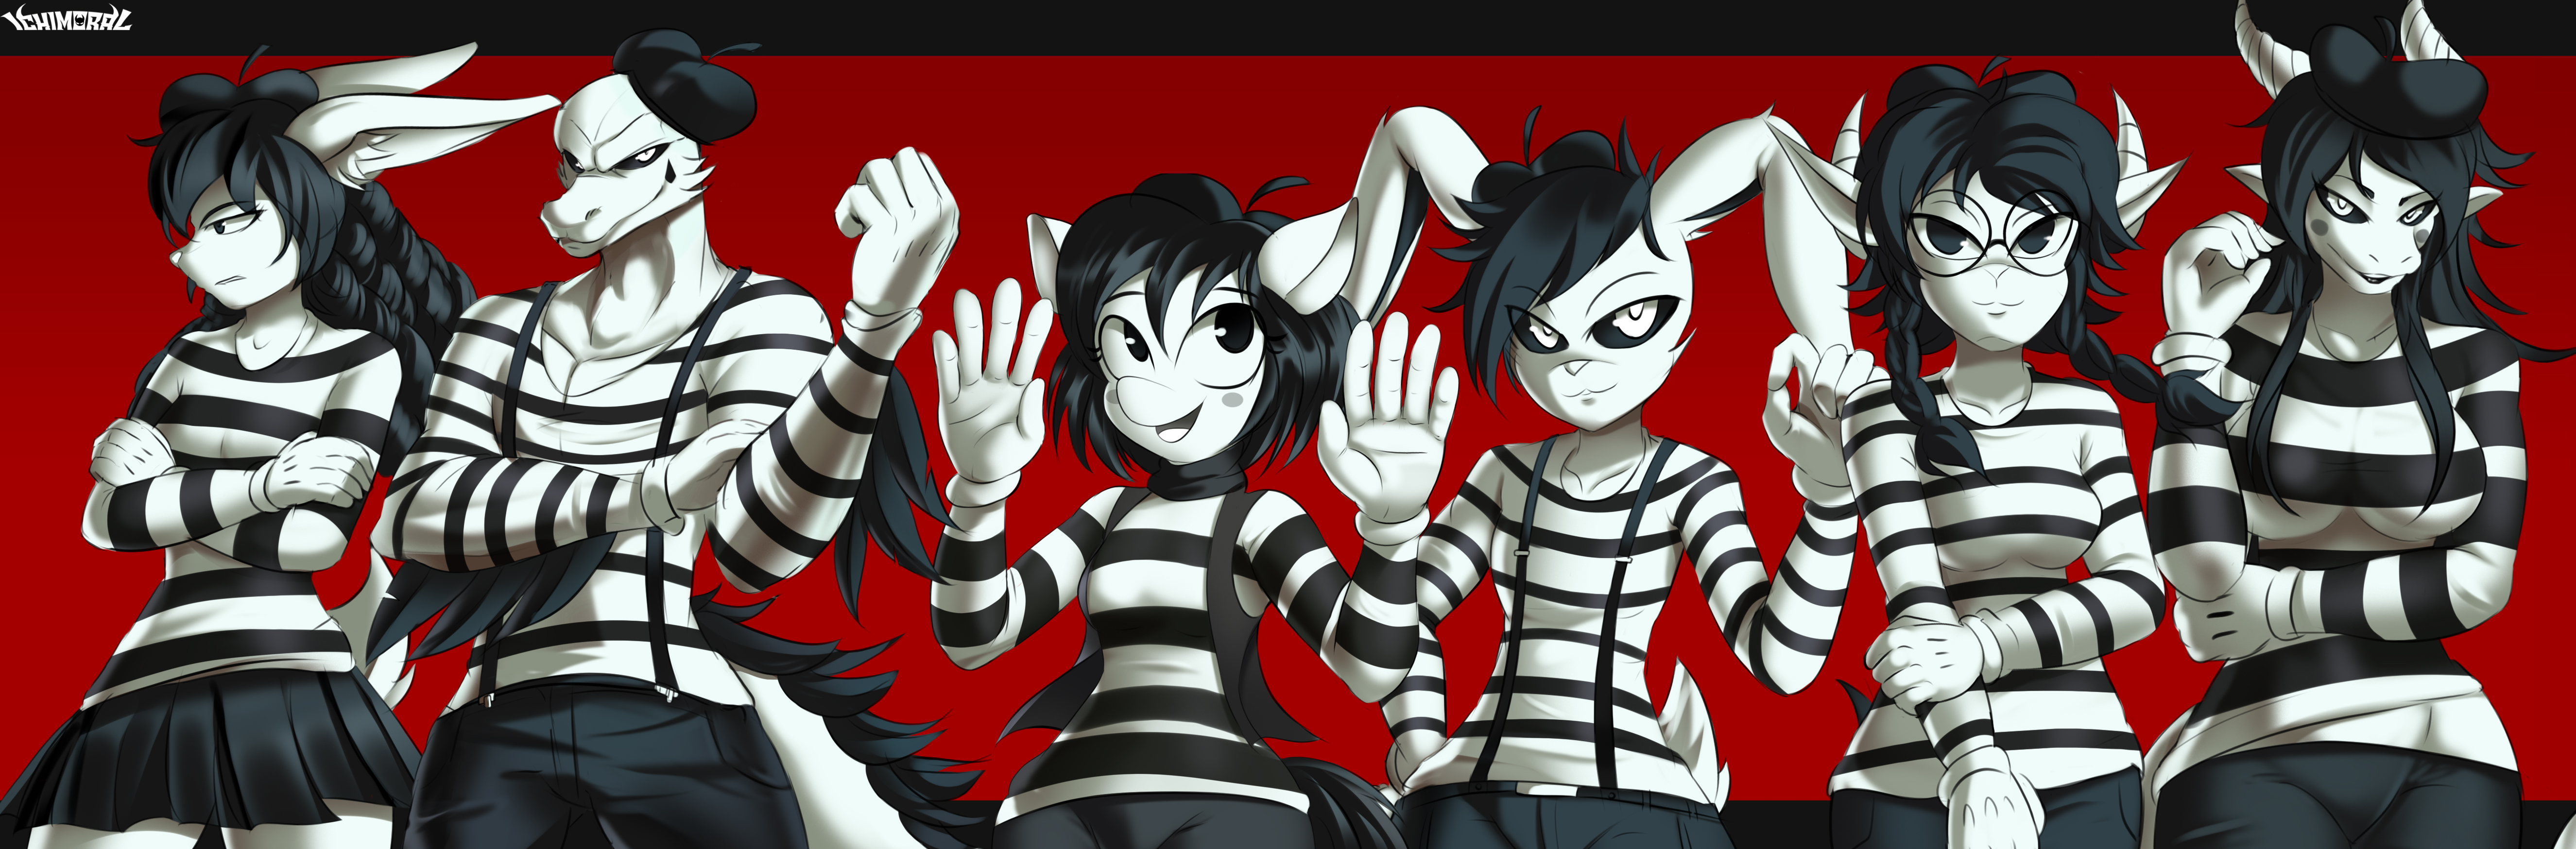 The Mime Gang by asdfr123456 -- Fur Affinity [dot] net